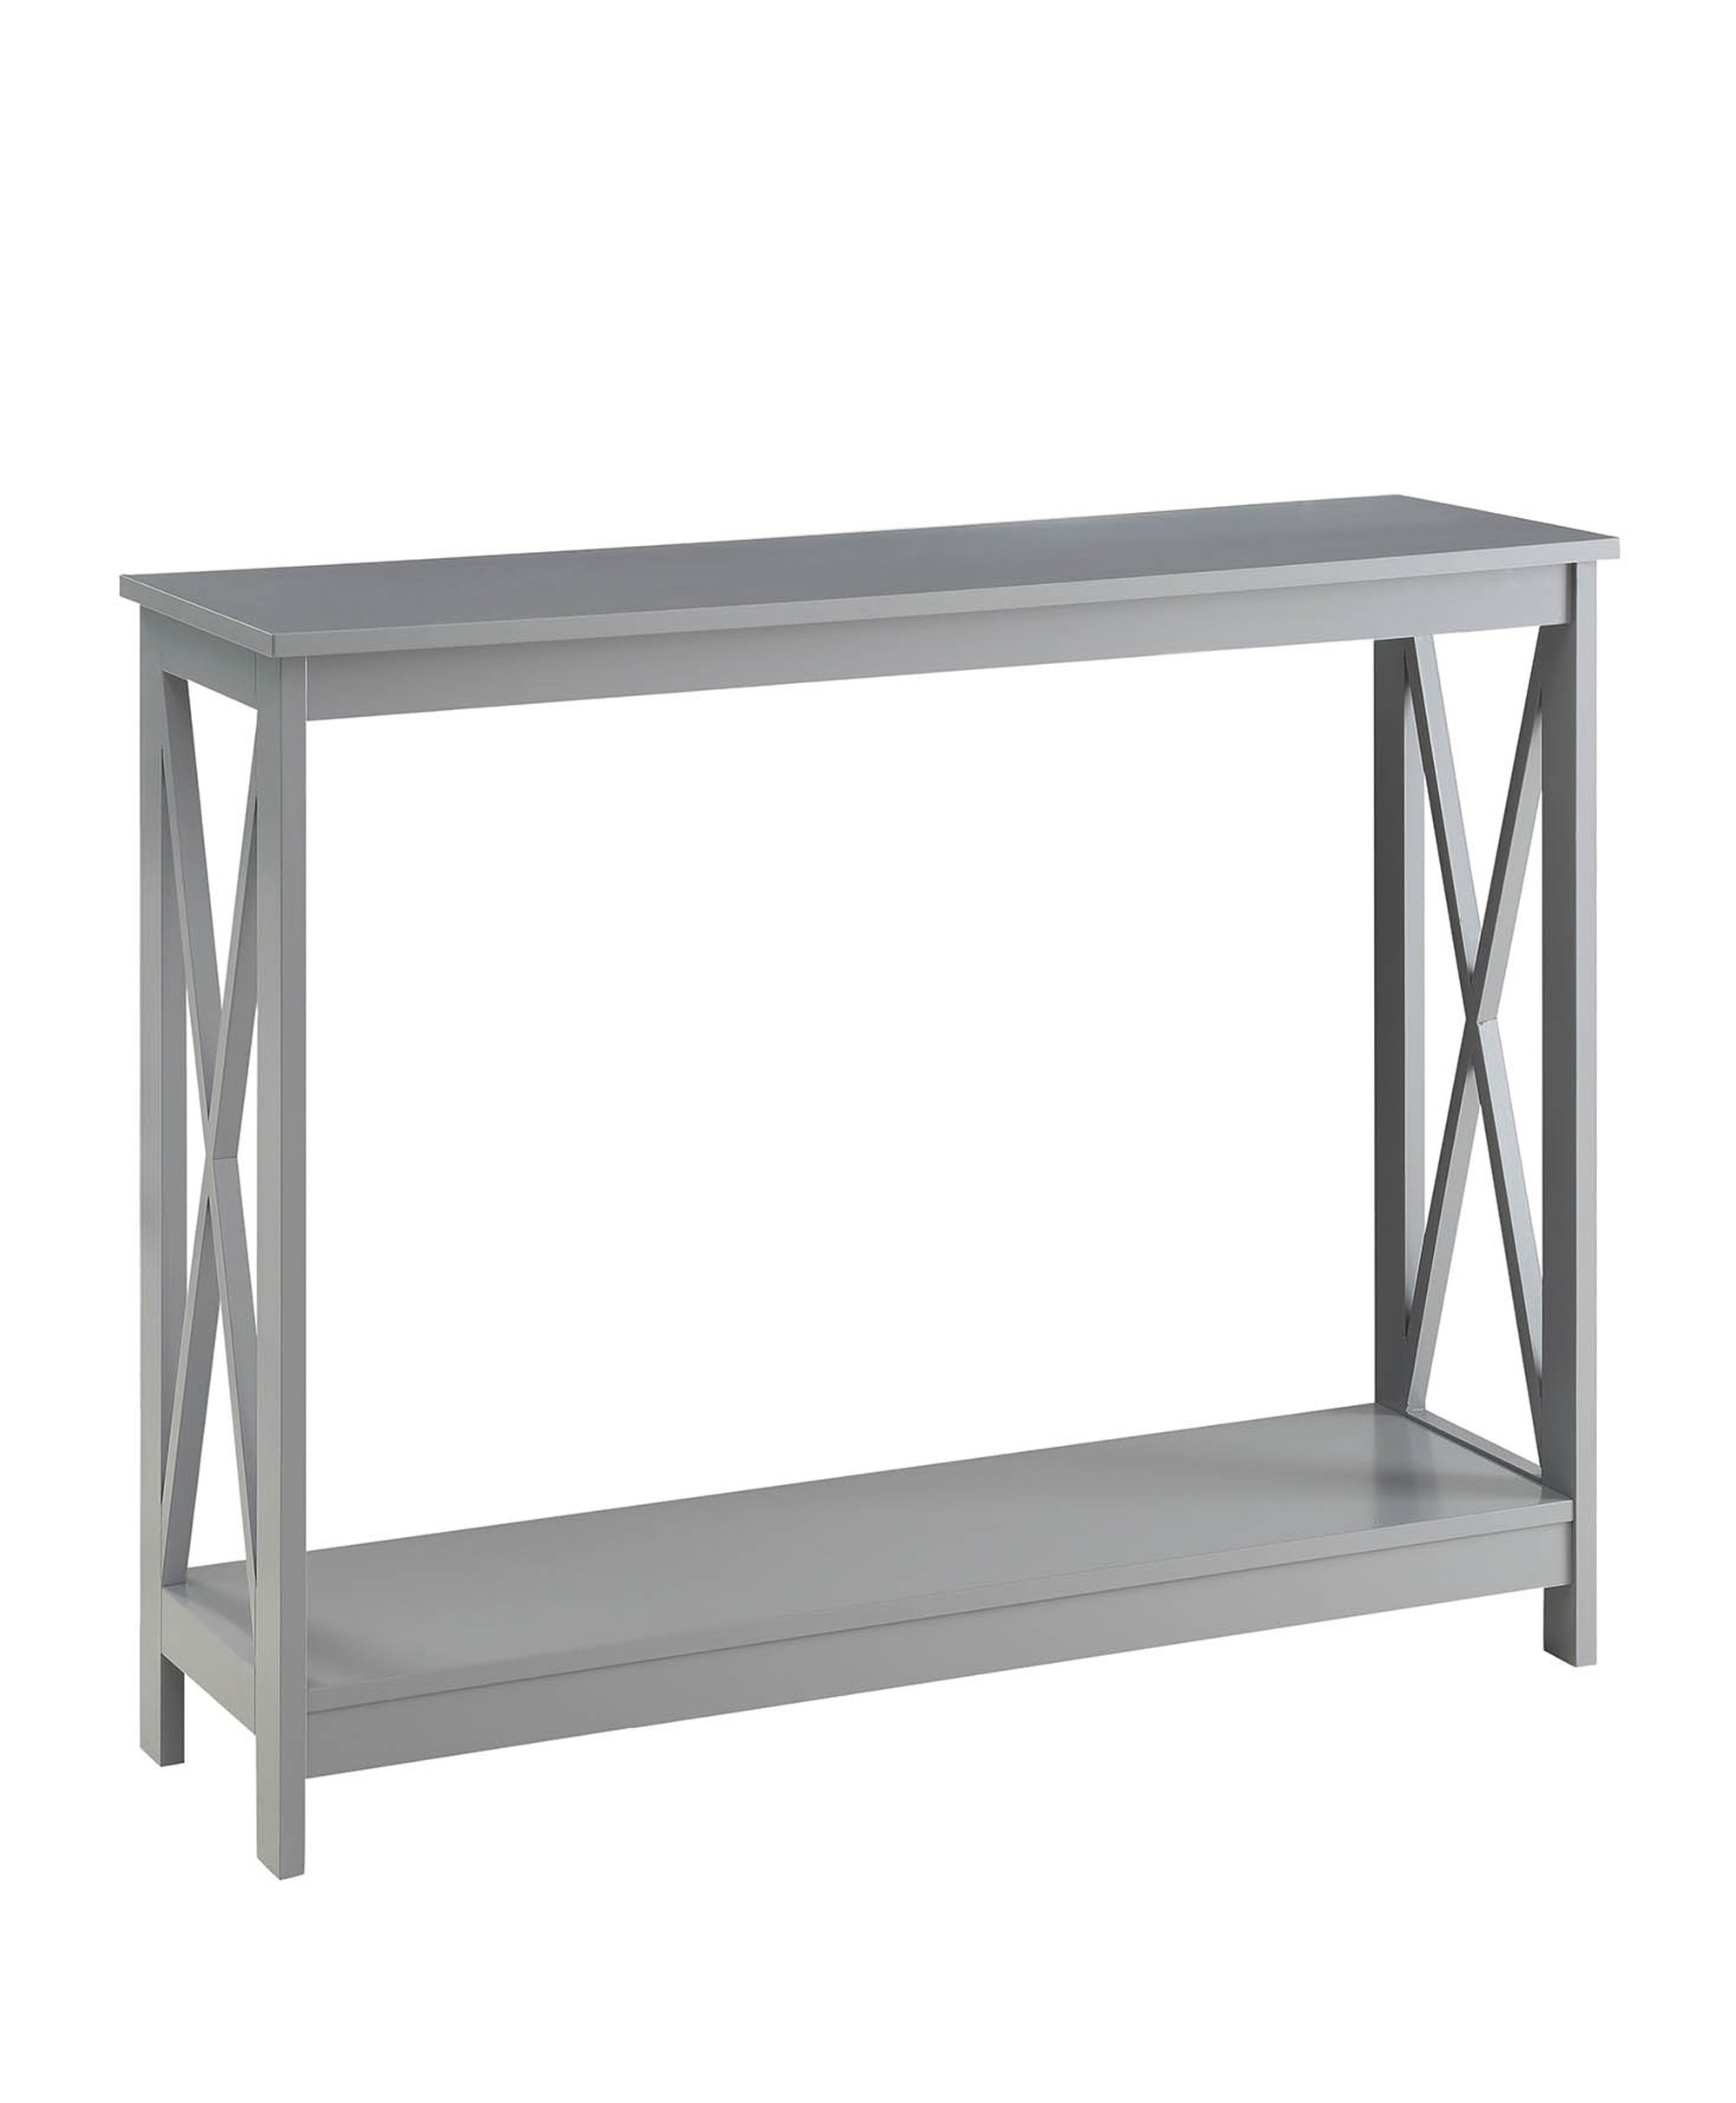 Convenience Concepts Oxford Console Table with Shelf, Gray